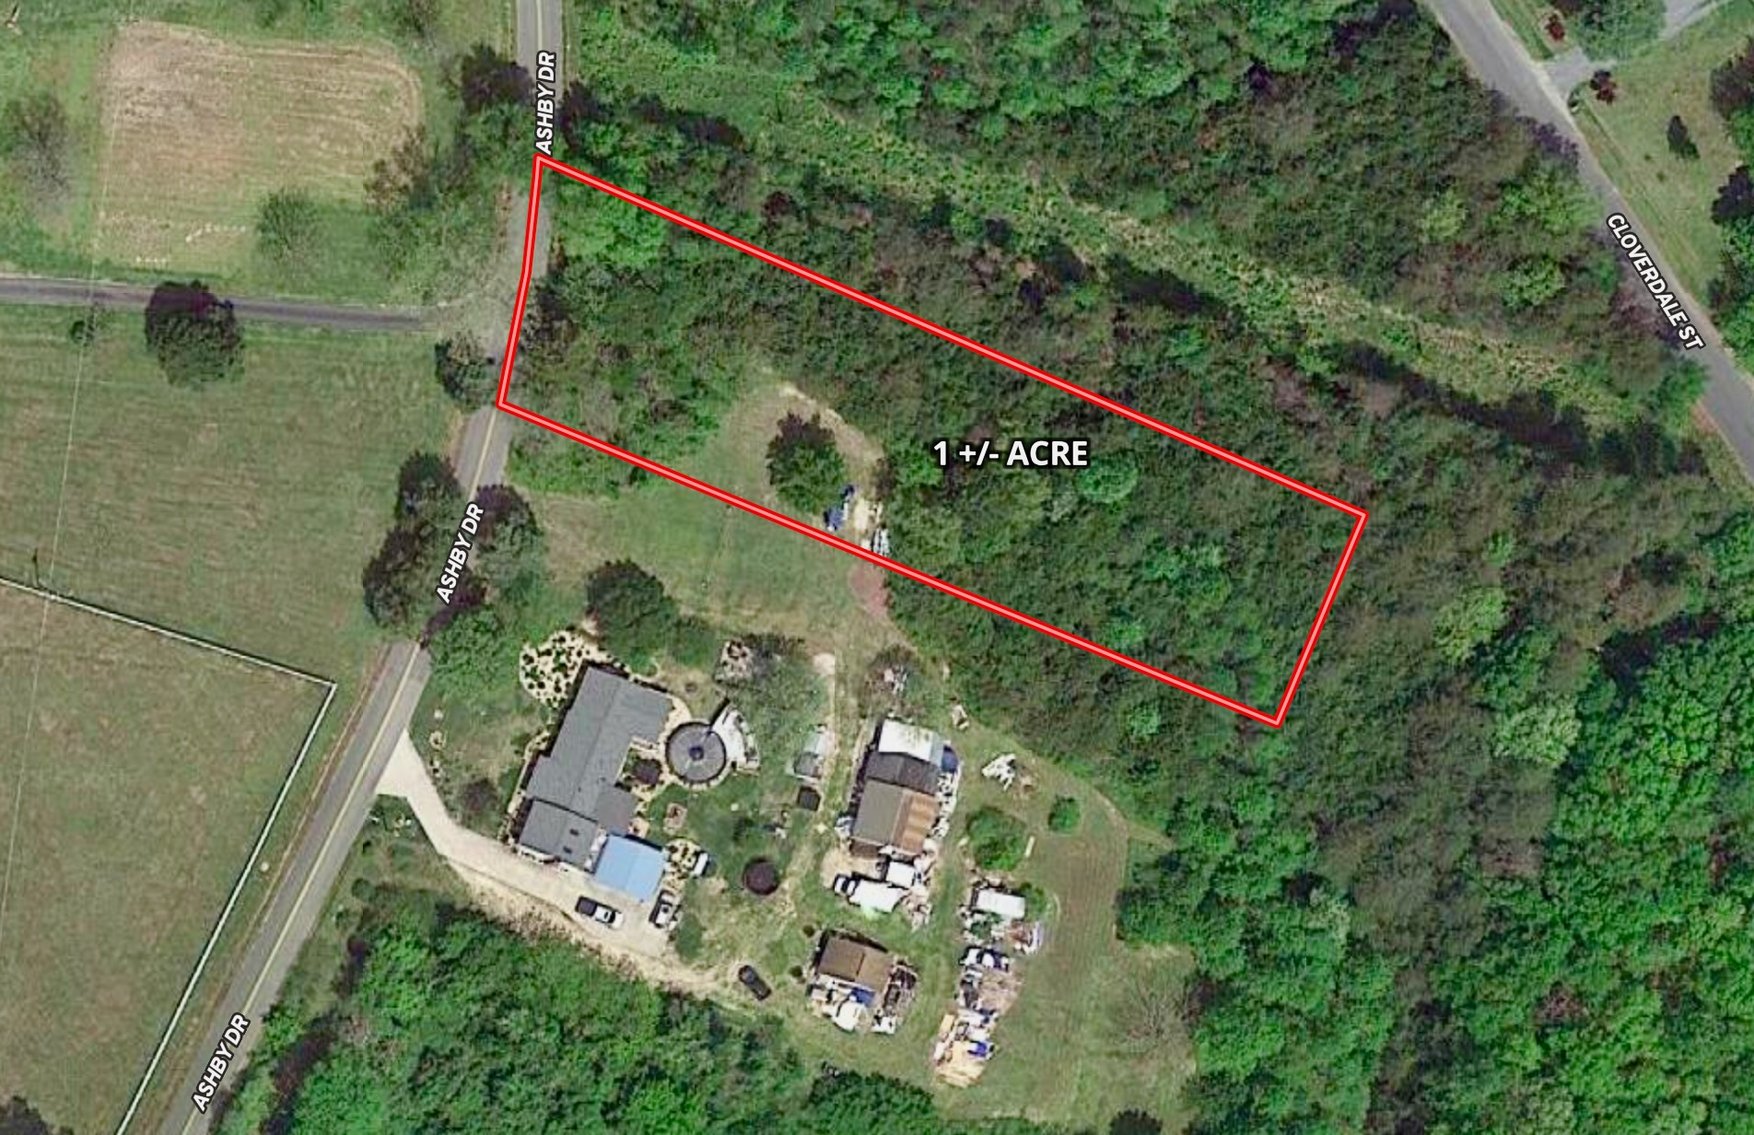 Image for 1 +/- Acre Spotsylvania County Lot Close to Retail, Schools, Rt. 3 & I-95--SELLING to the HIGHEST BIDDER via ONLINE BIDDING!!